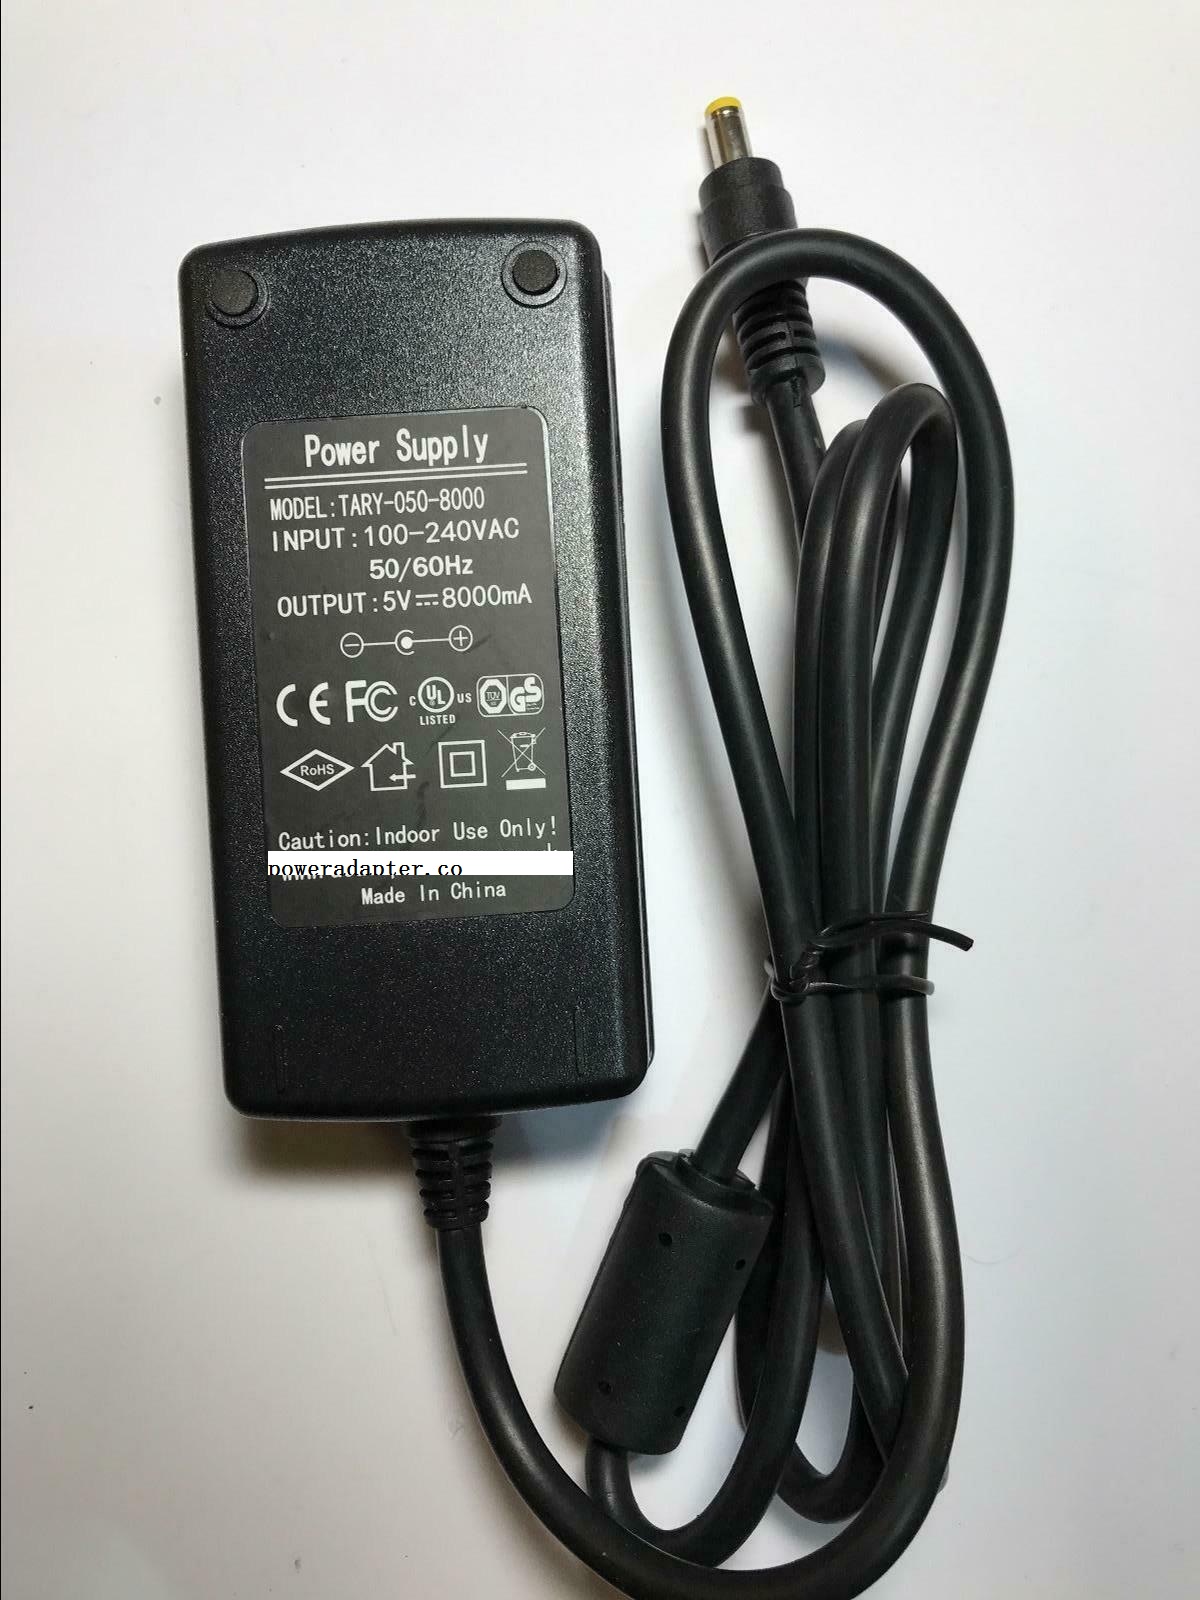 Replacement for 5V 8A AC/DC Adapter Power Supply model DYF-0508001A Desktop PSU Replacement for 5V 8A AC/DC Adapter Po - Click Image to Close